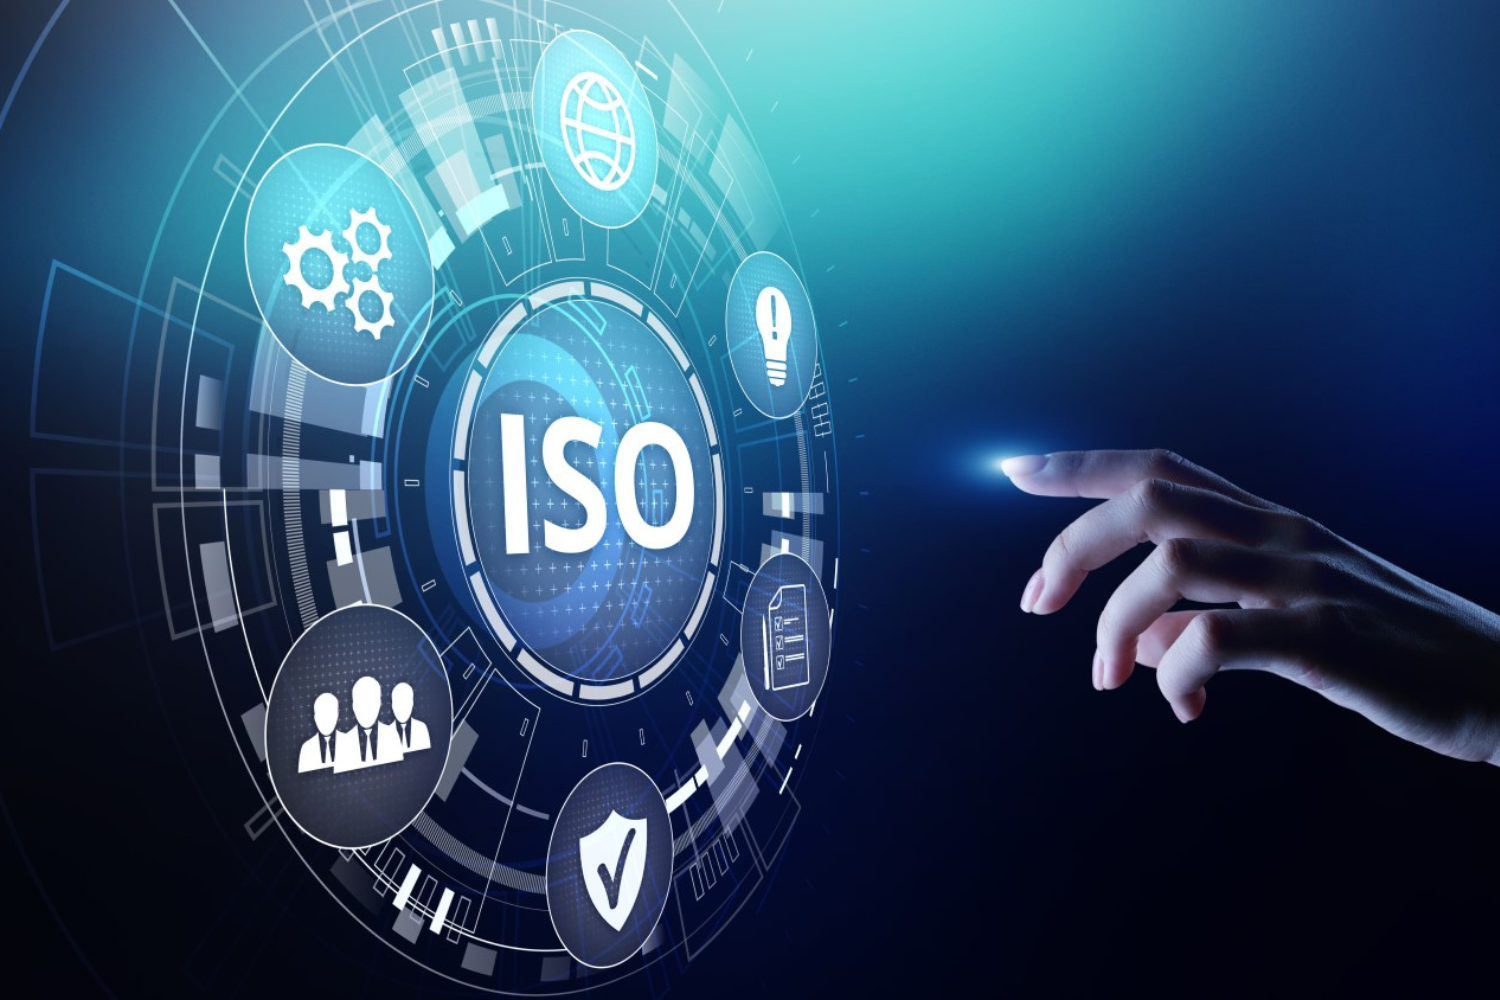 Image of a Iso standardization